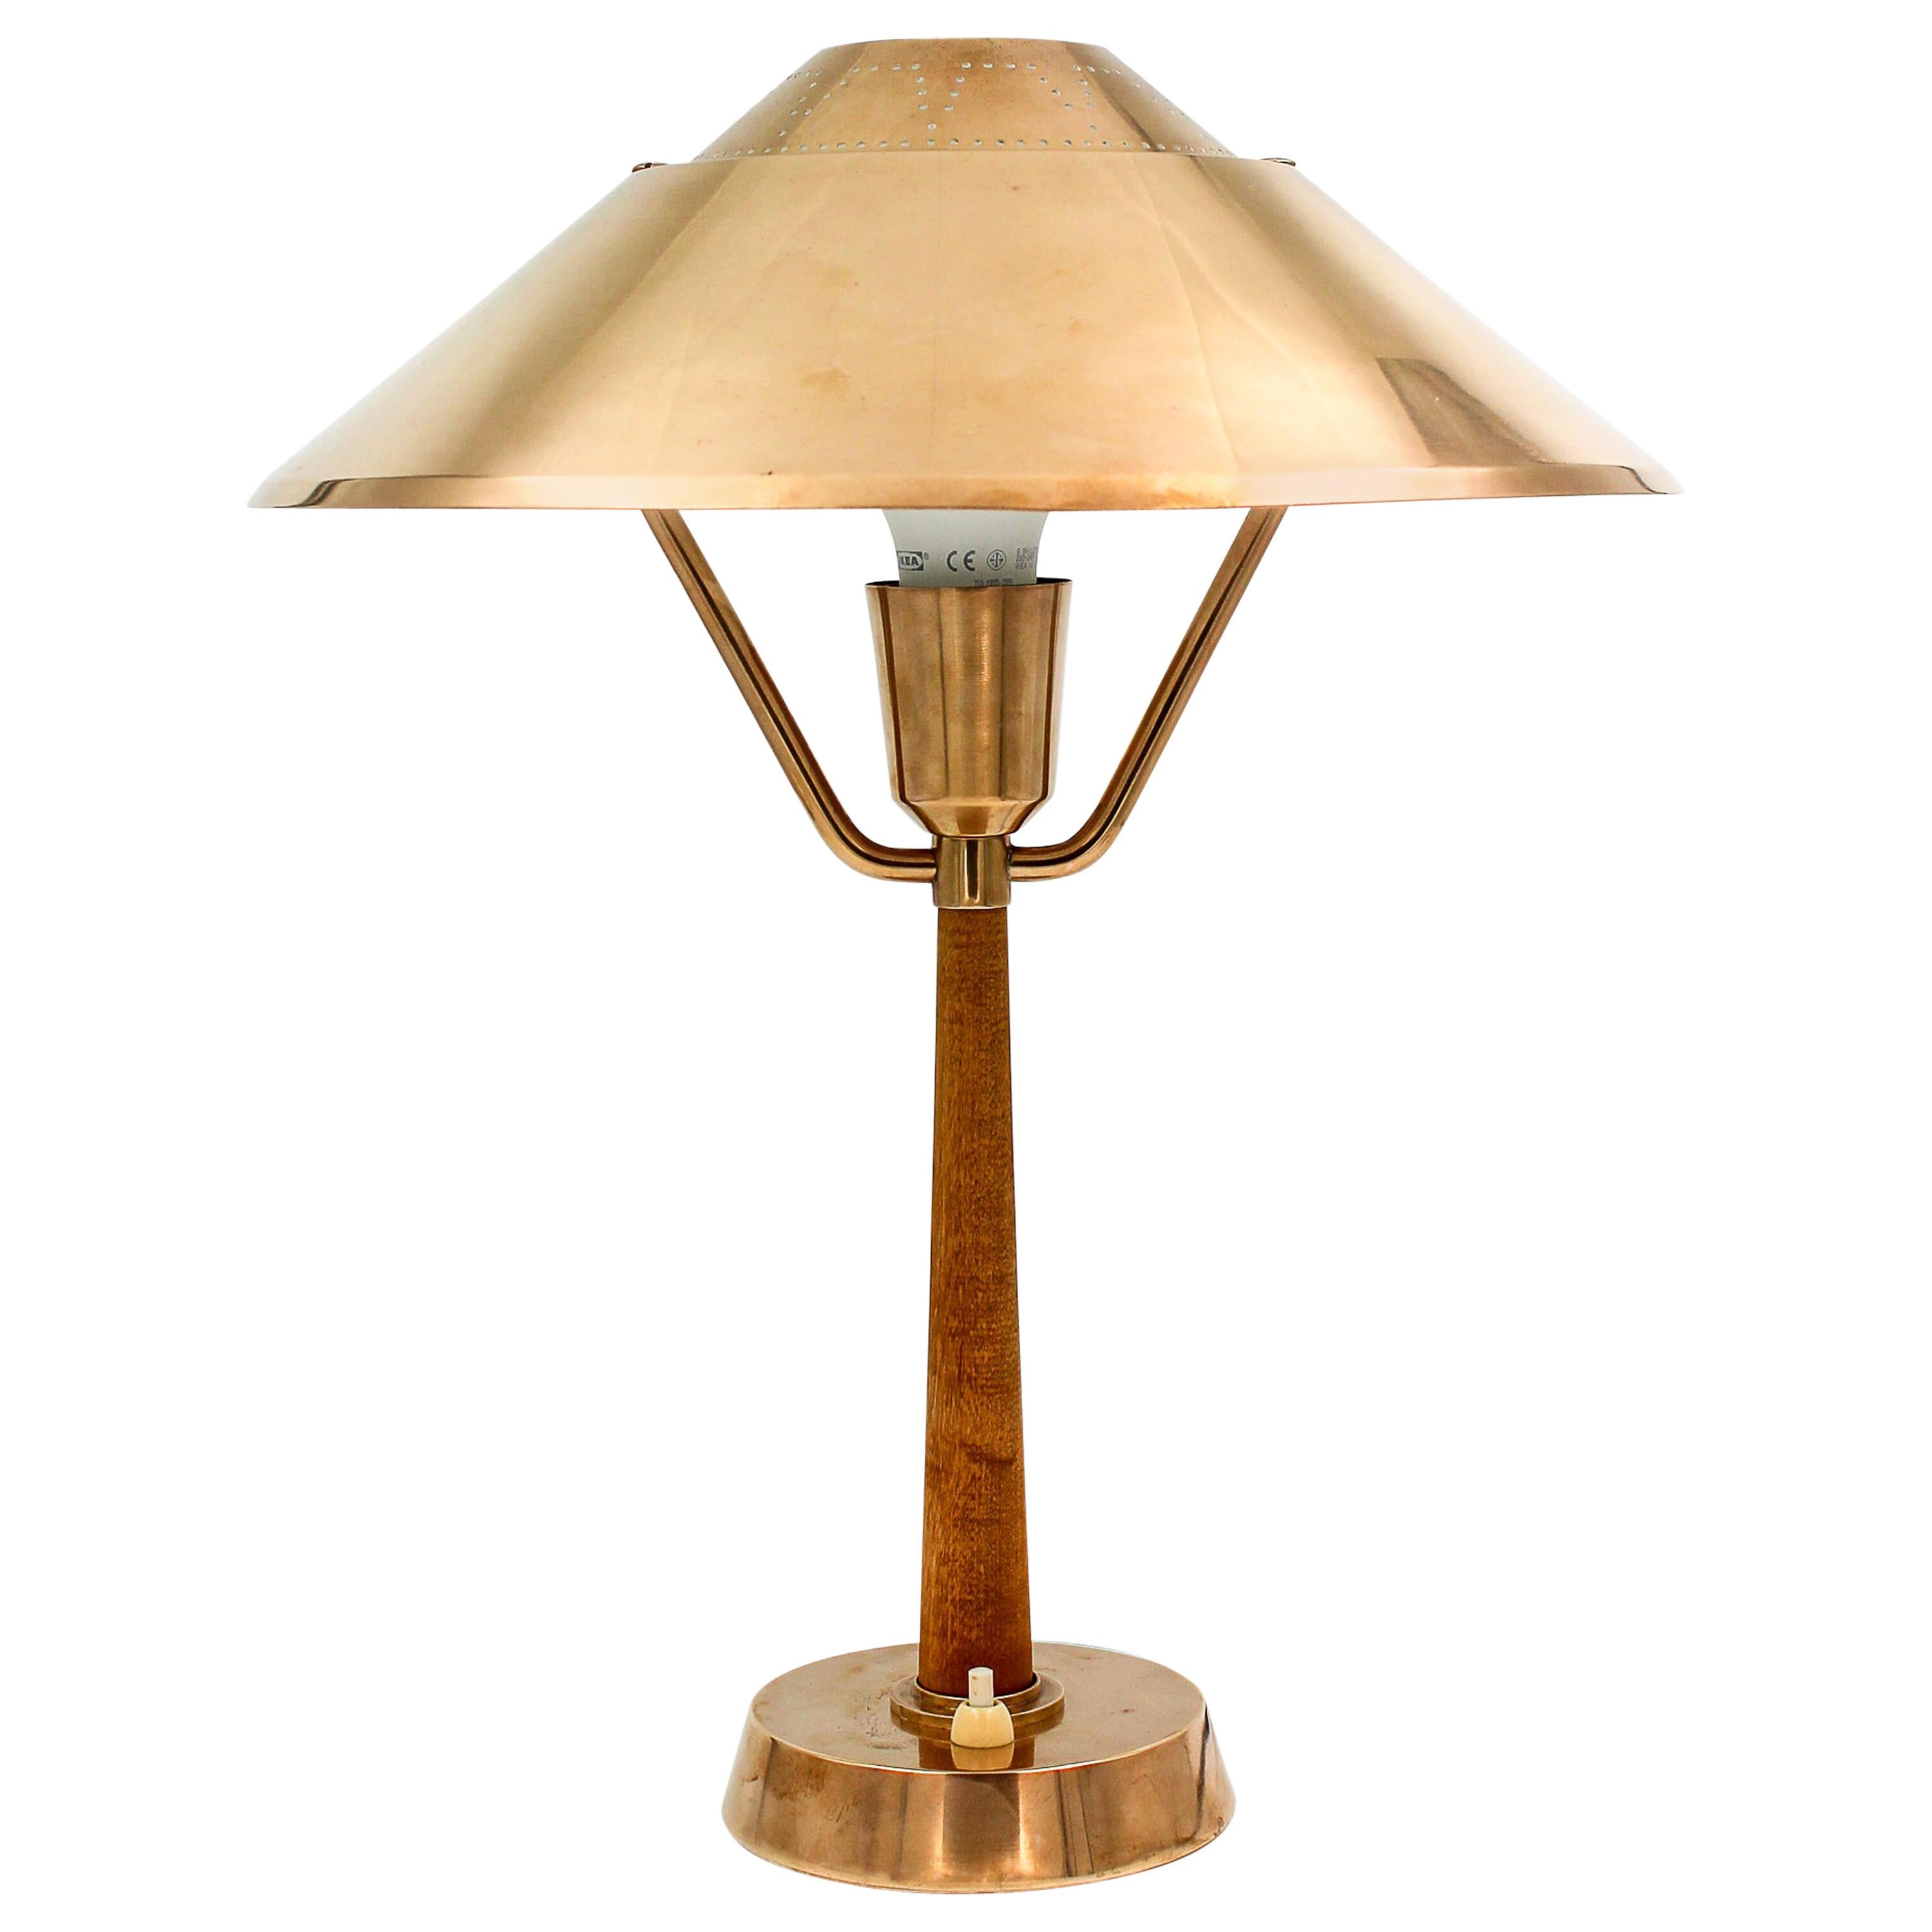 Midcentury Swedish Table Lamp by AB E Hansson & Co, 1940s im Angebot